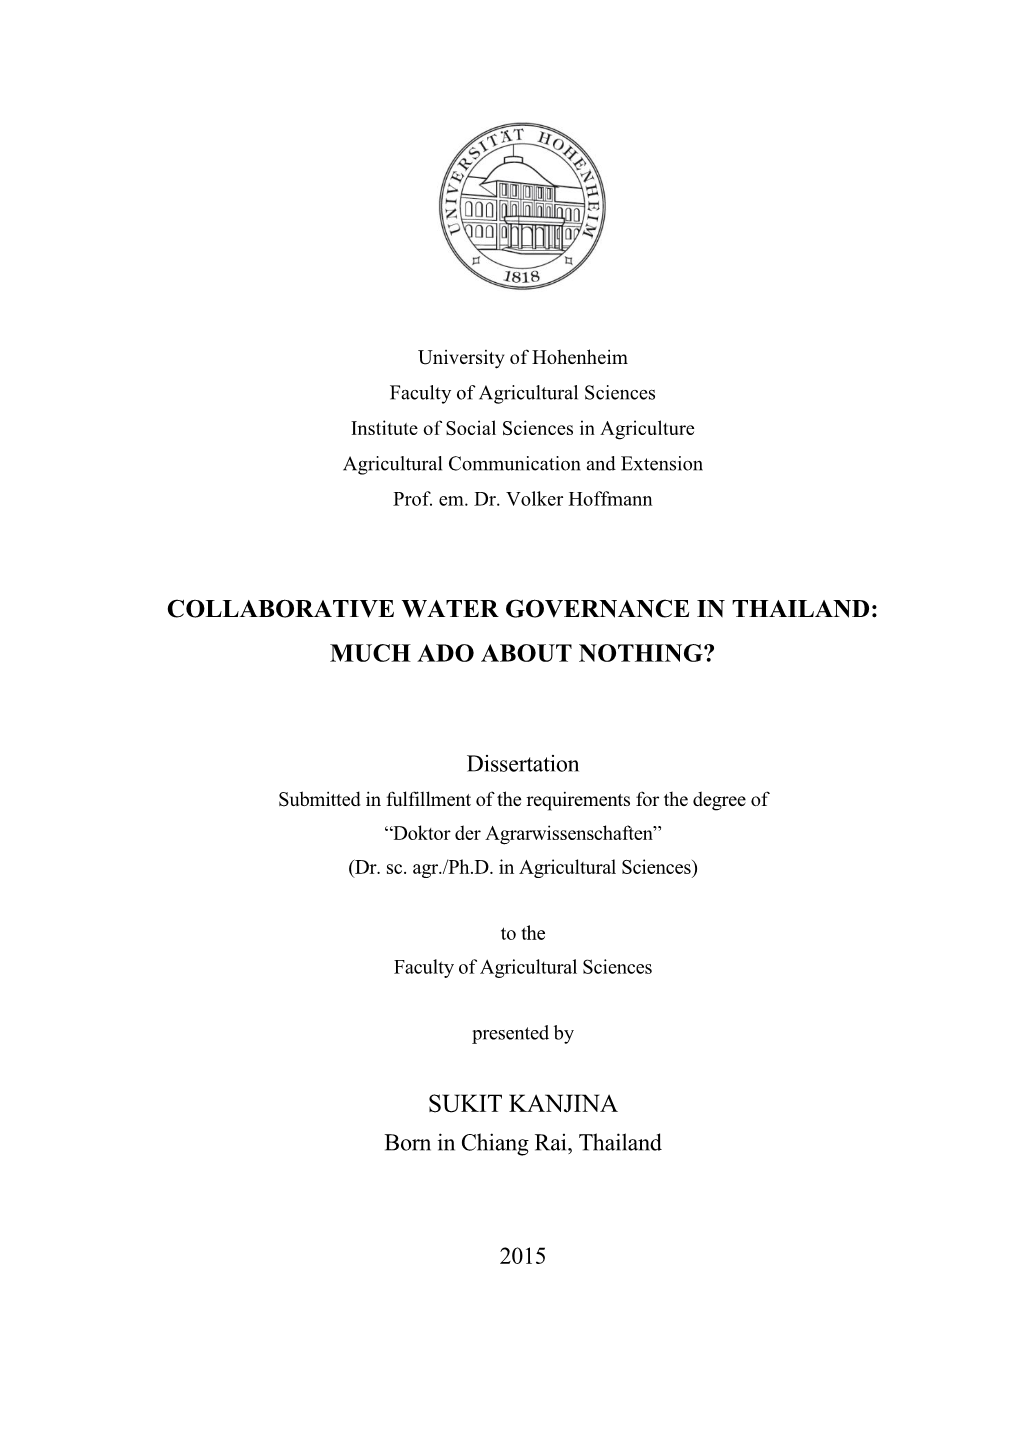 Collaborative Water Governance in Thailand: Much Ado About Nothing? Sukit Kanjina